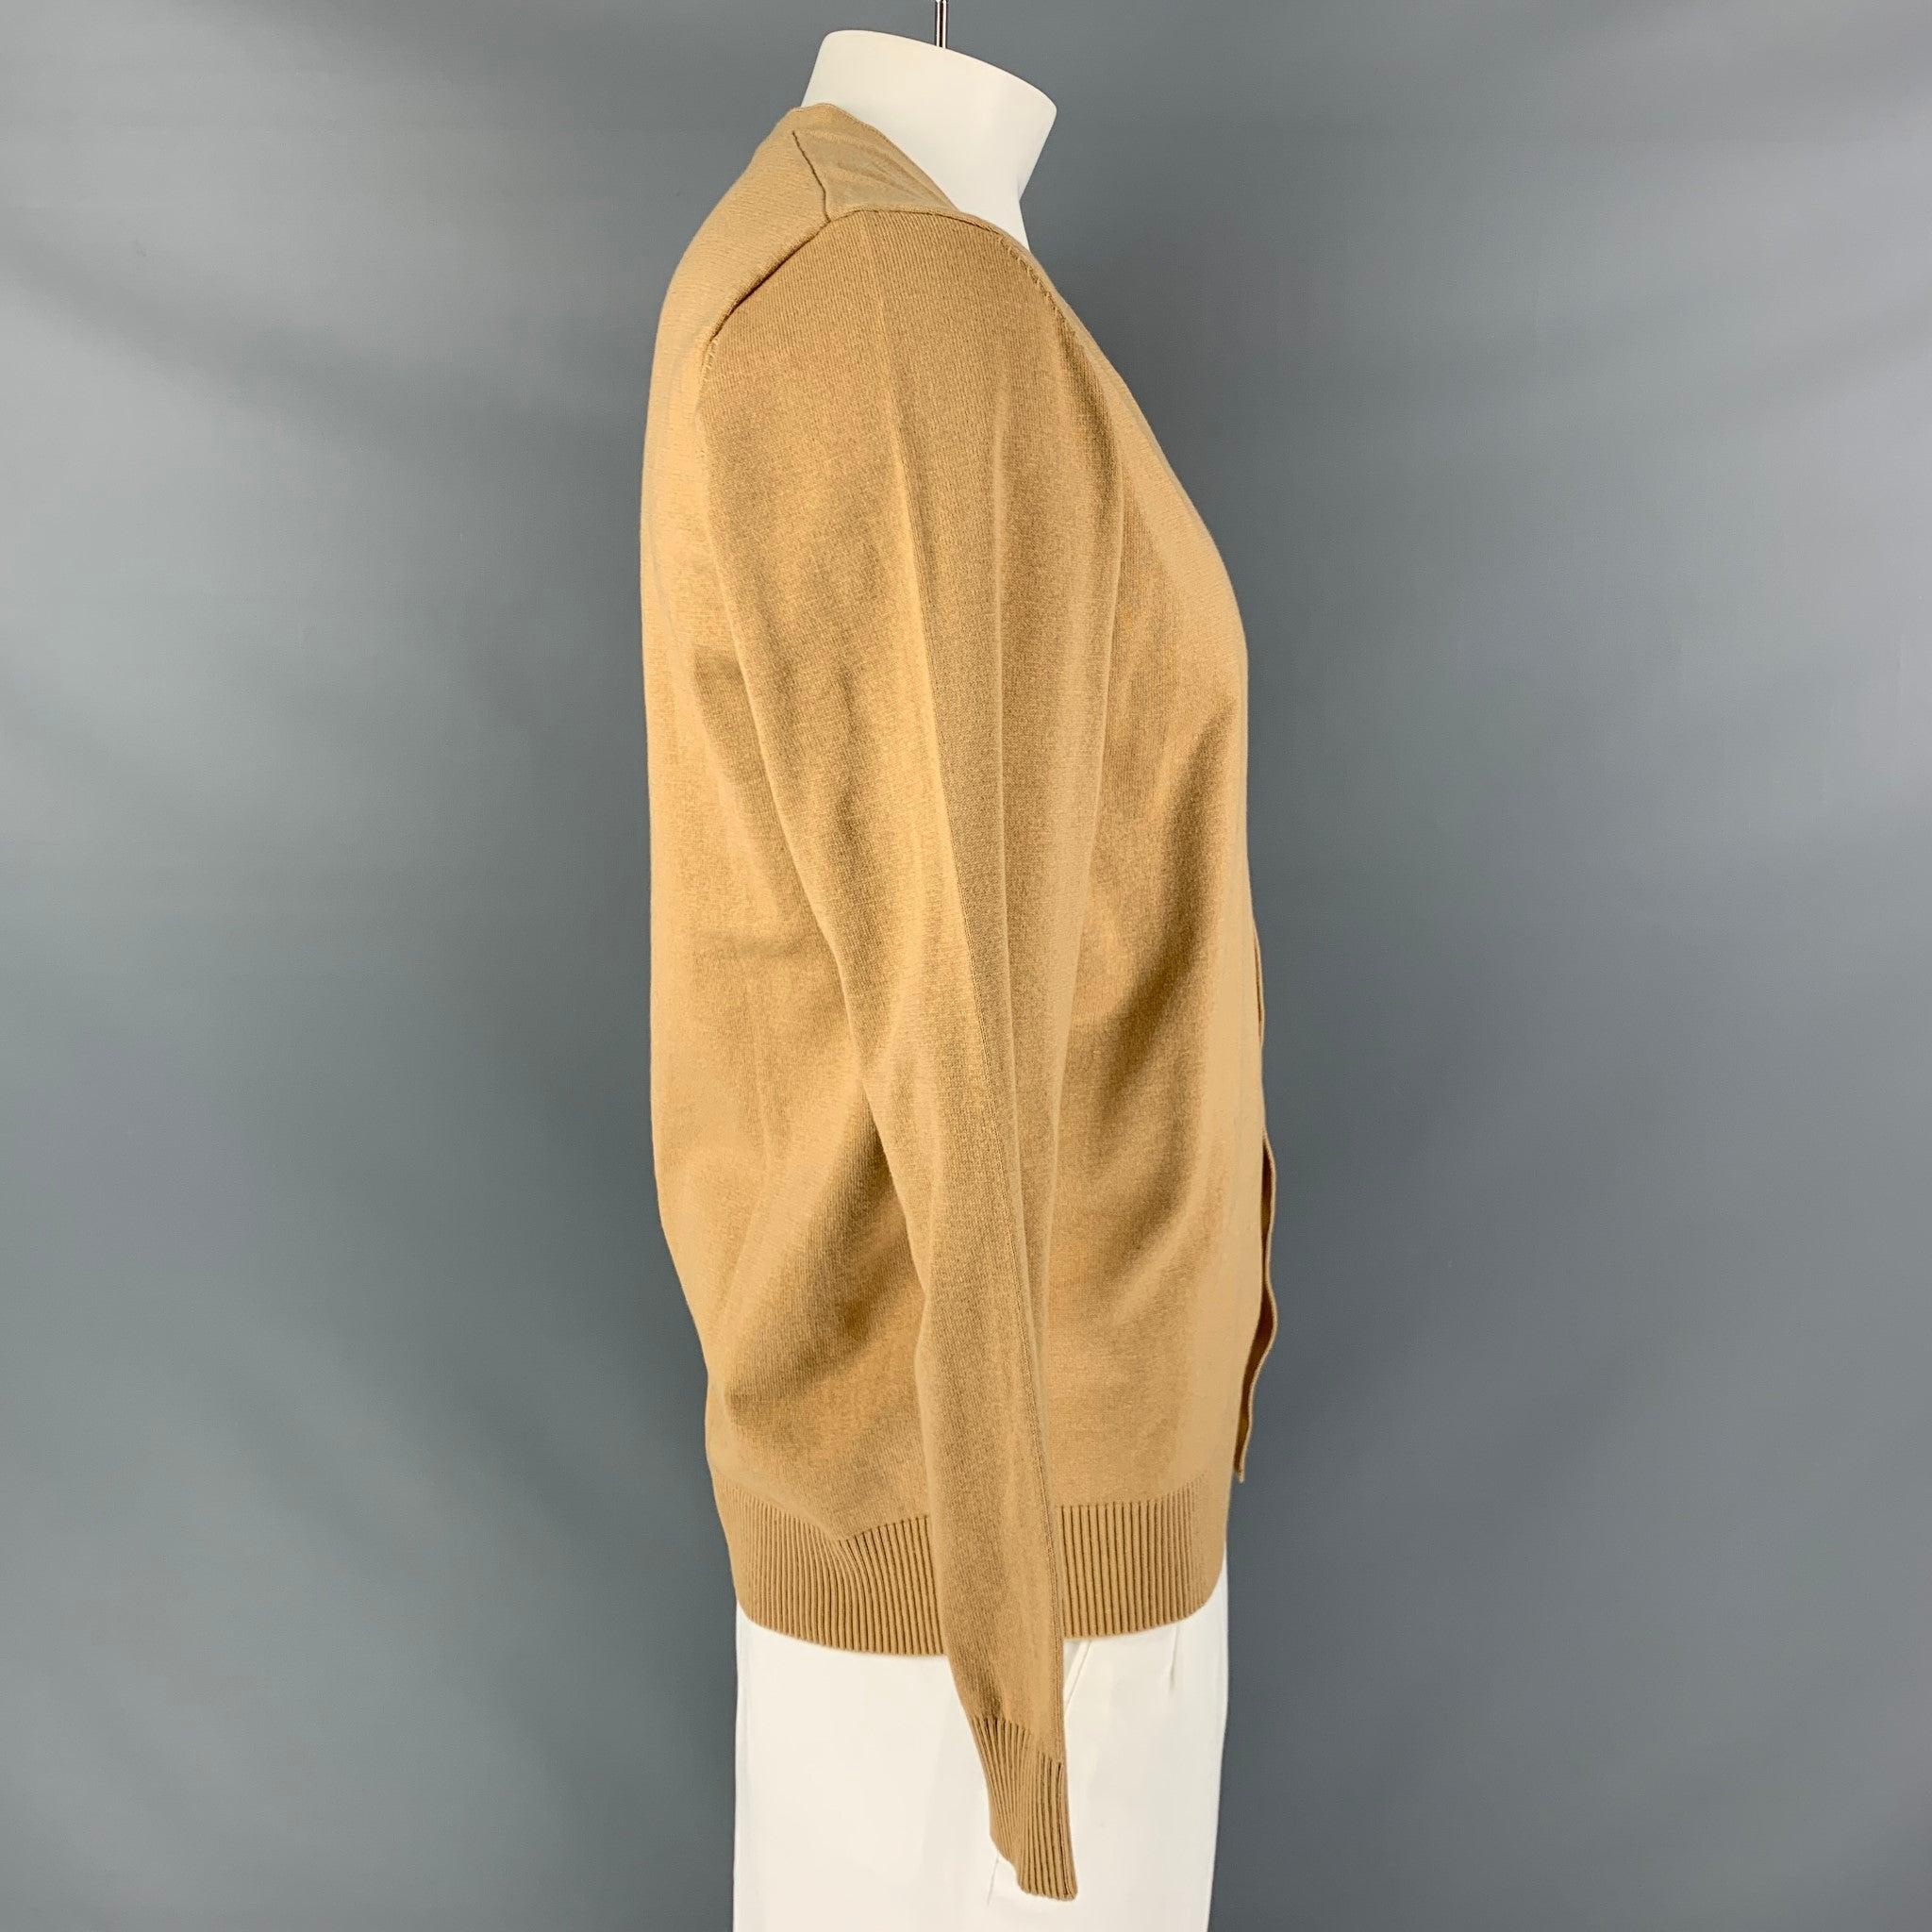 KITON cardigan comes in a beige cashmere and silk knit featuring a V-neck and button up closure. New With Tags. 

Marked:   L 

Measurements: 
 
Shoulder: 18 inches Chest: 46 inches Sleeve: 25 inches Length: 27 inches 

  
  
 
Reference: